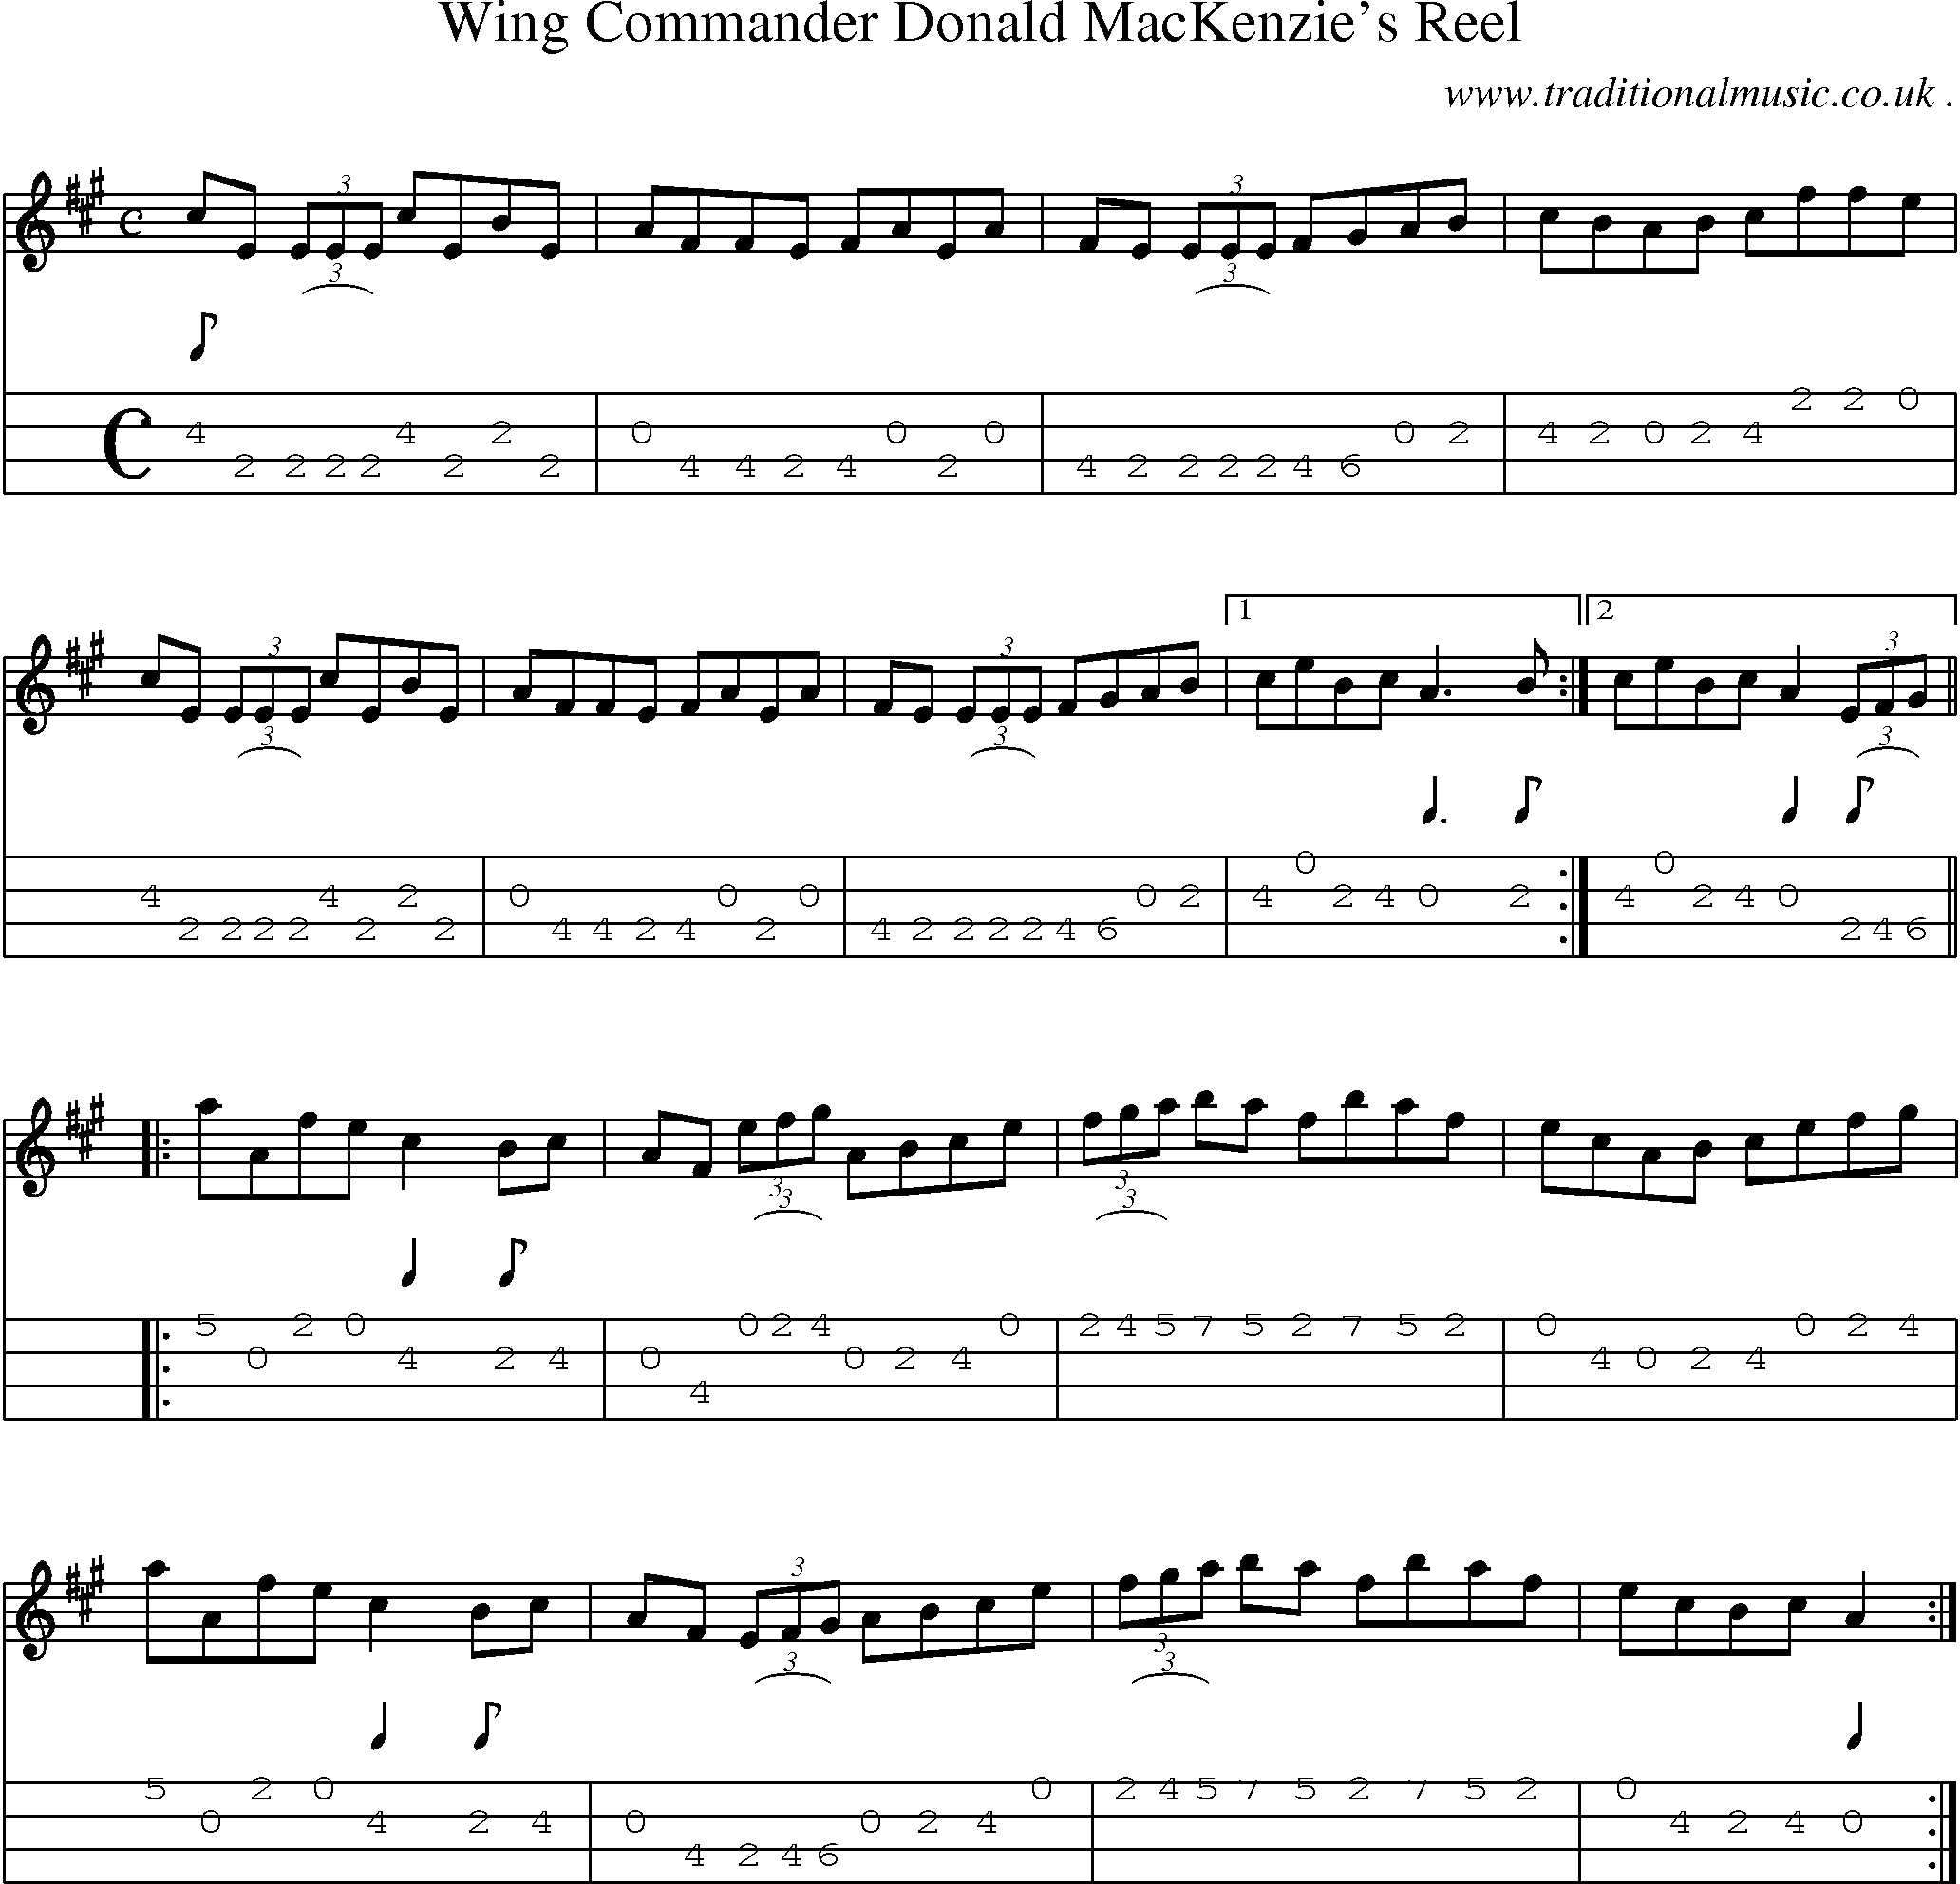 Sheet-music  score, Chords and Mandolin Tabs for Wing Commander Donald Mackenzies Reel